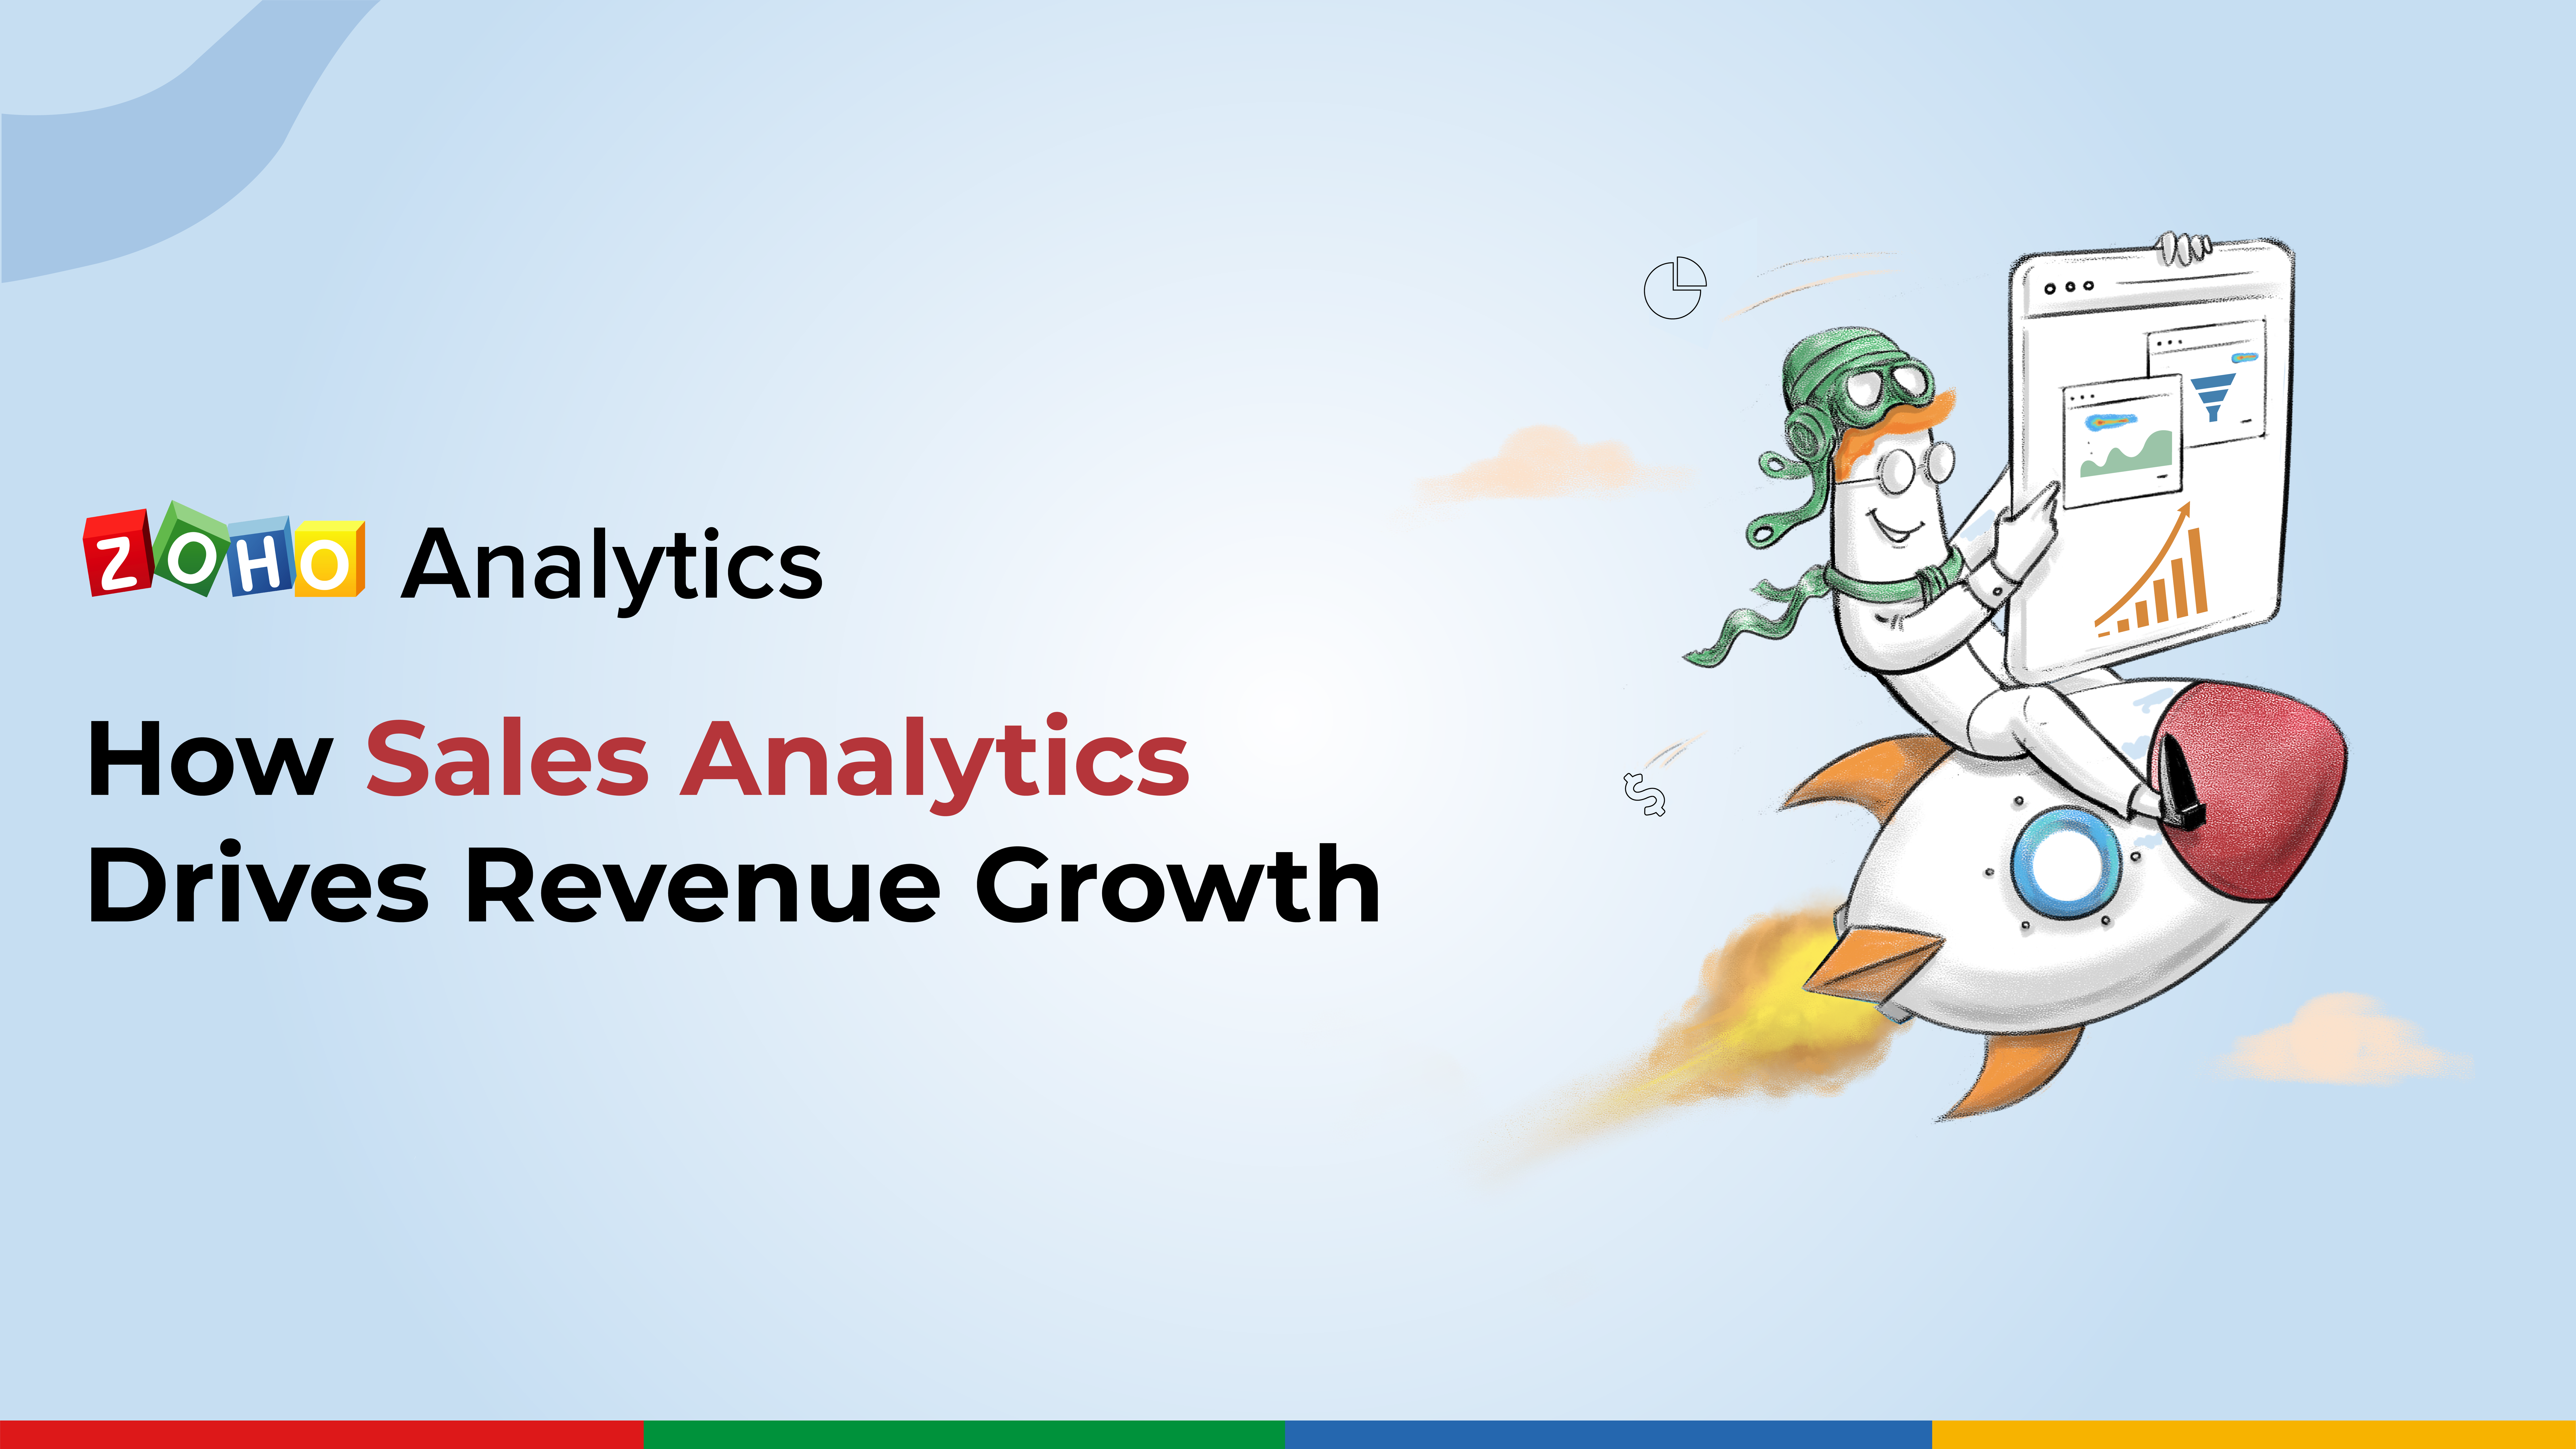 How Sales Analytics drives revenue growth